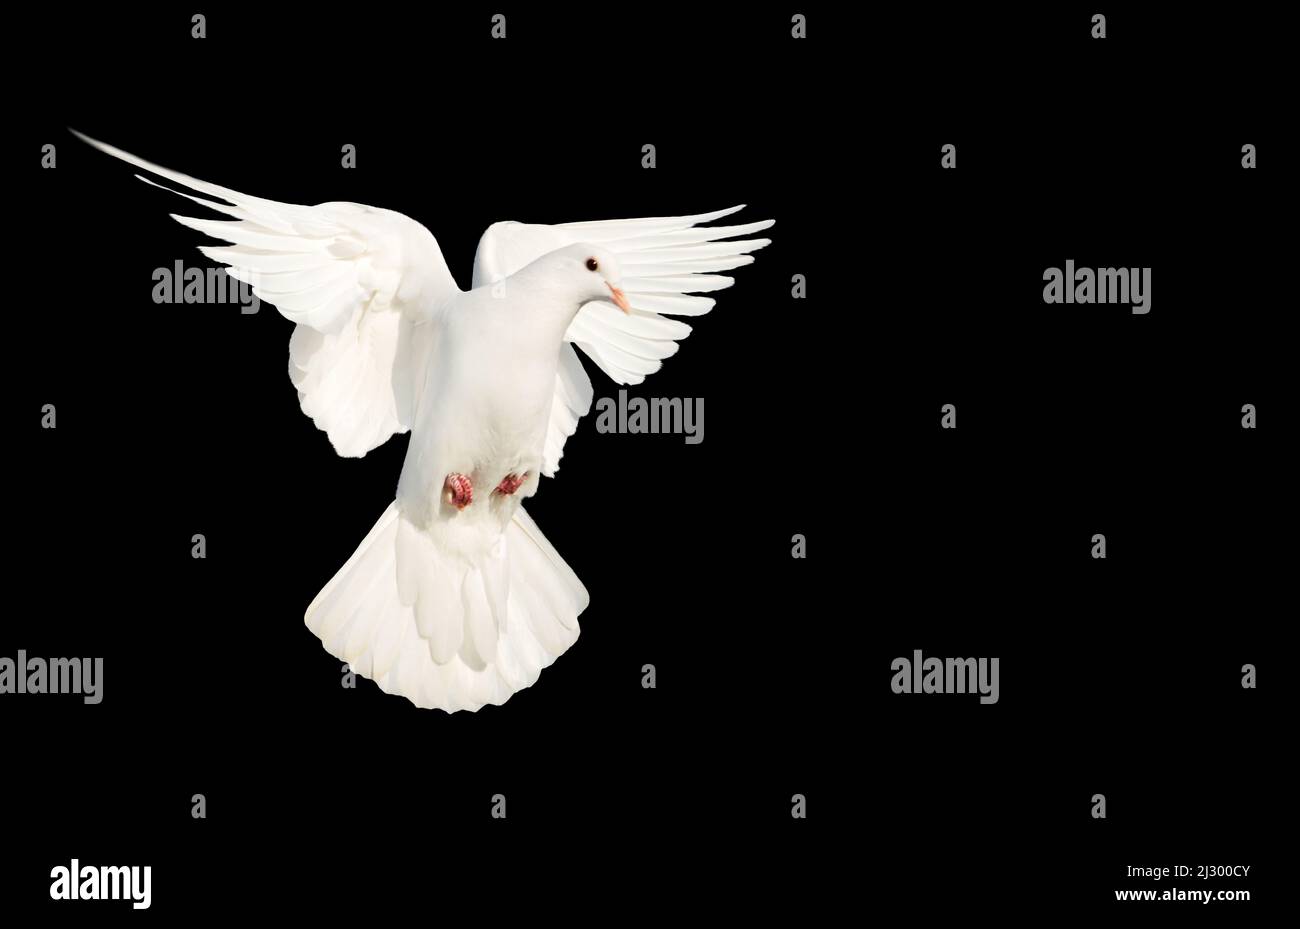 white dove flying on a black background Stock Photo